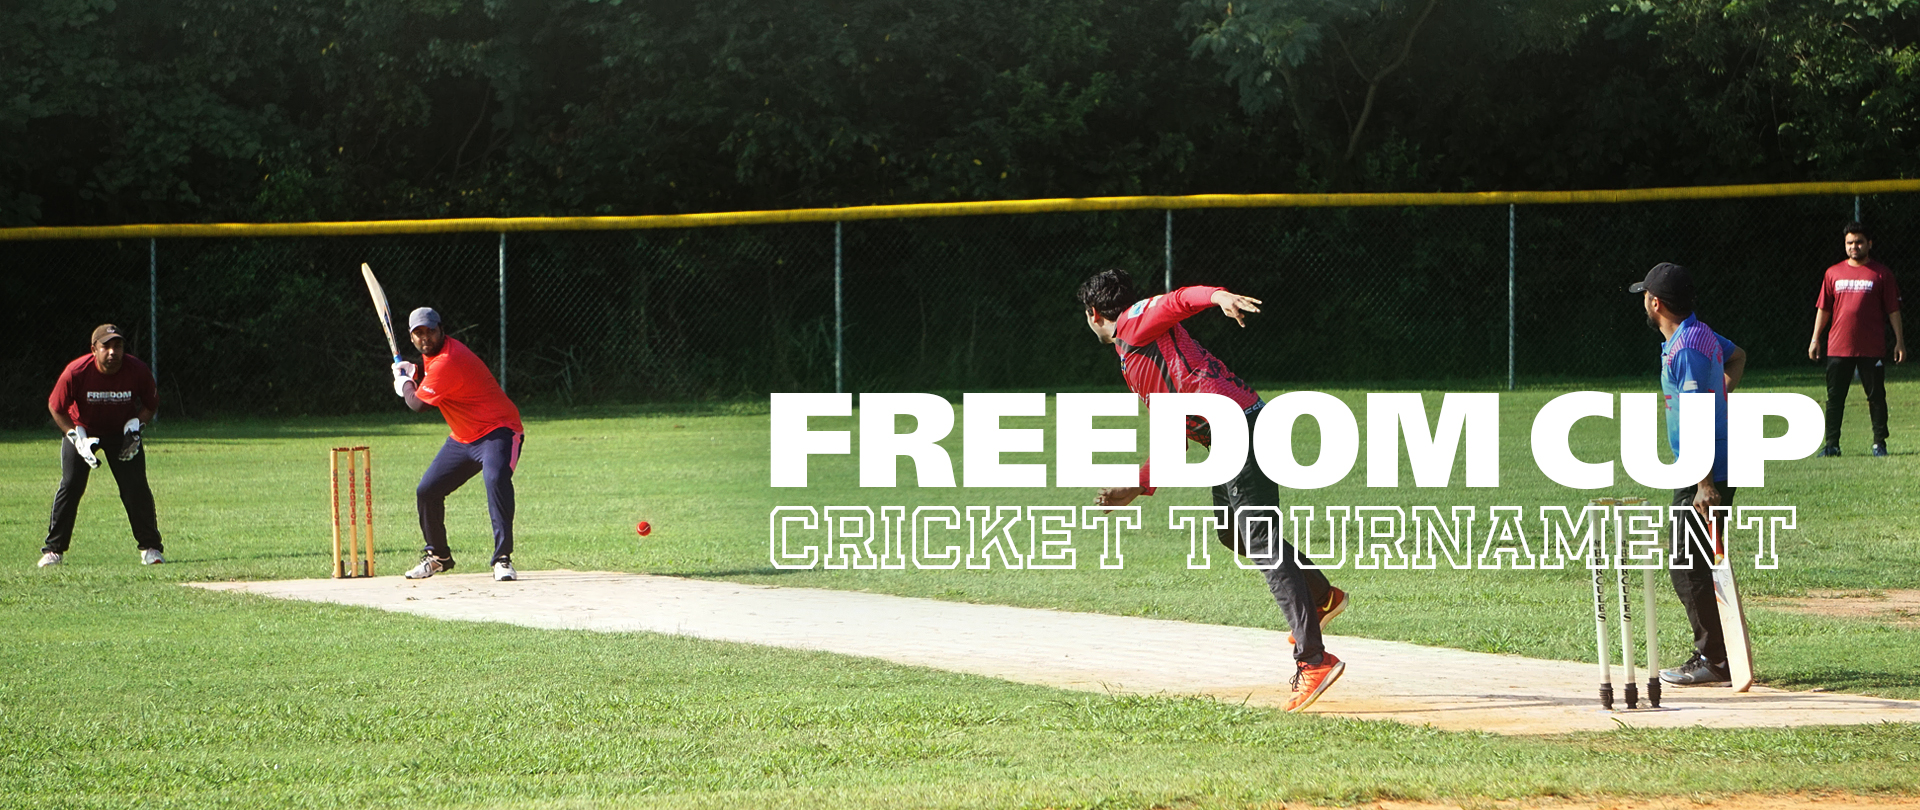 Freedom Cup Cricket
Awards Banquet
Saturday, August 20
